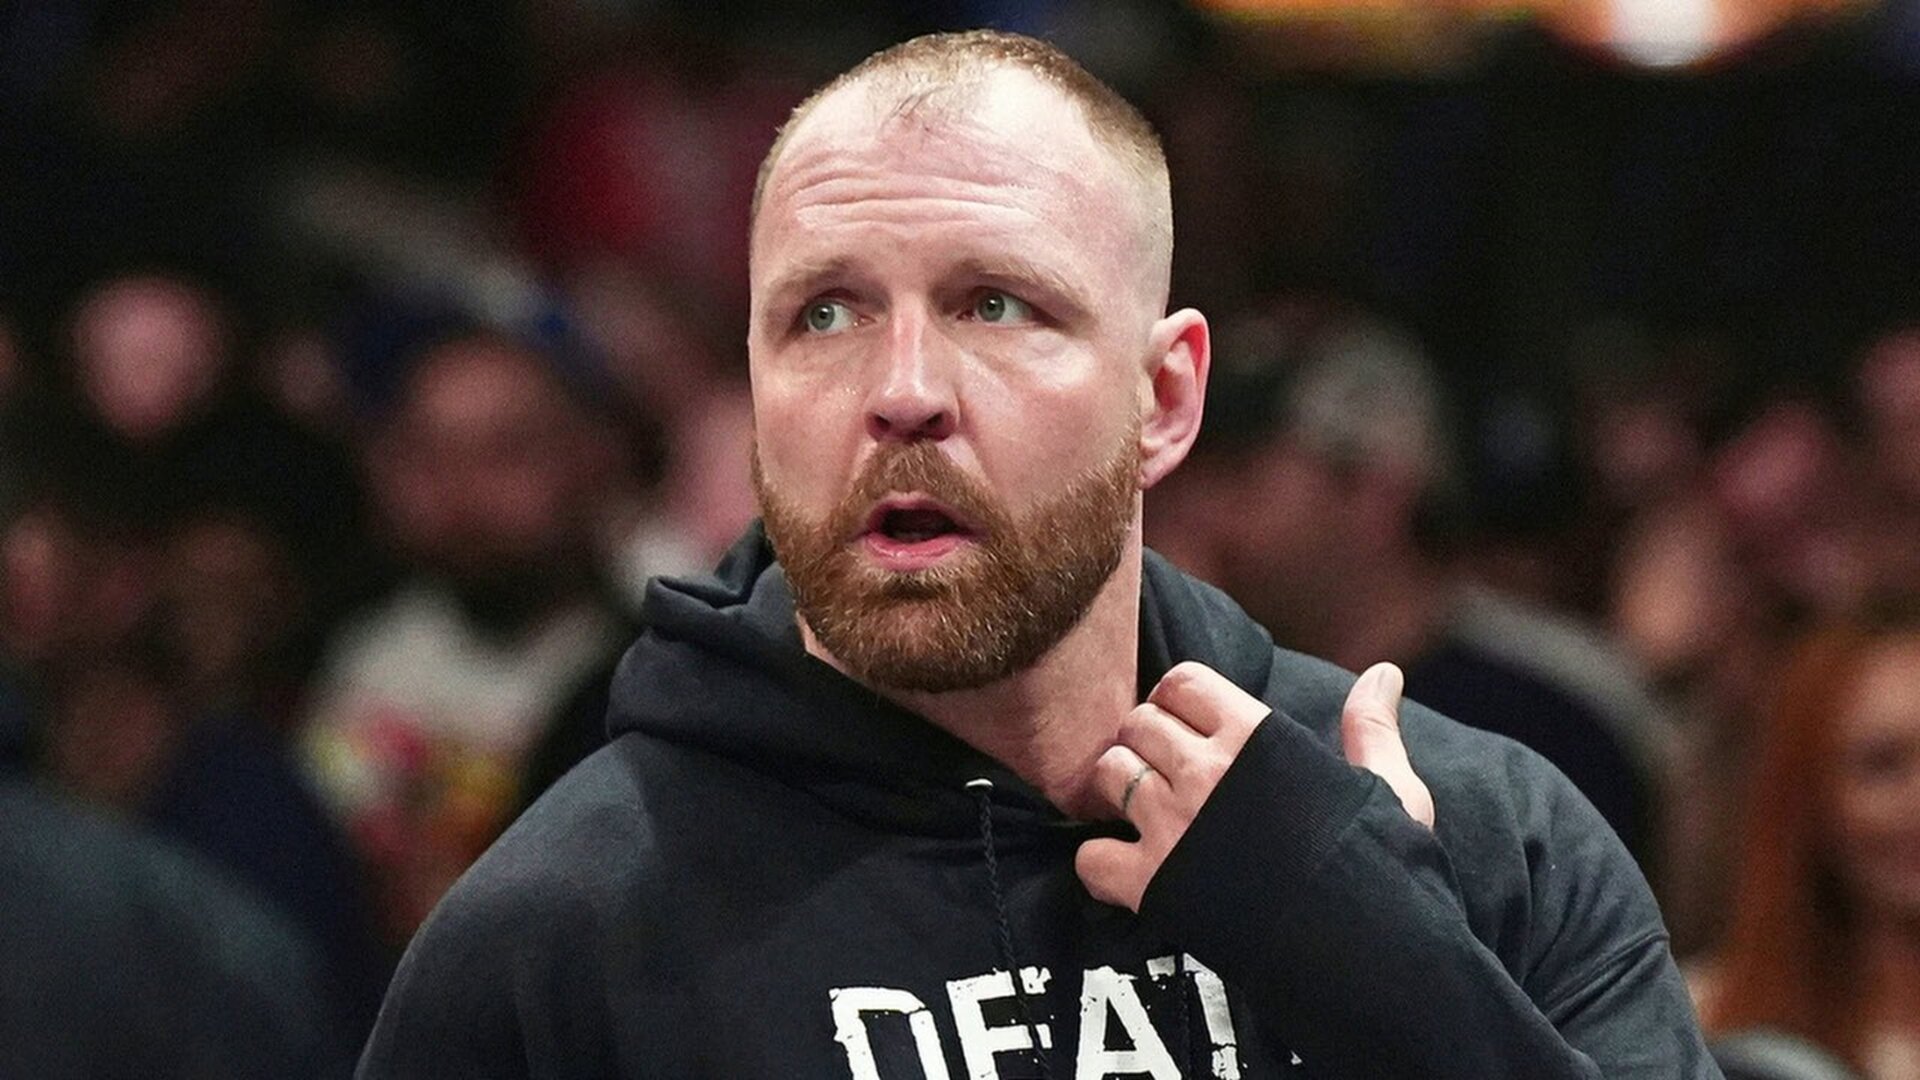 Jon Moxley’s Journey - A Look At His Road To Wrestling Stardom